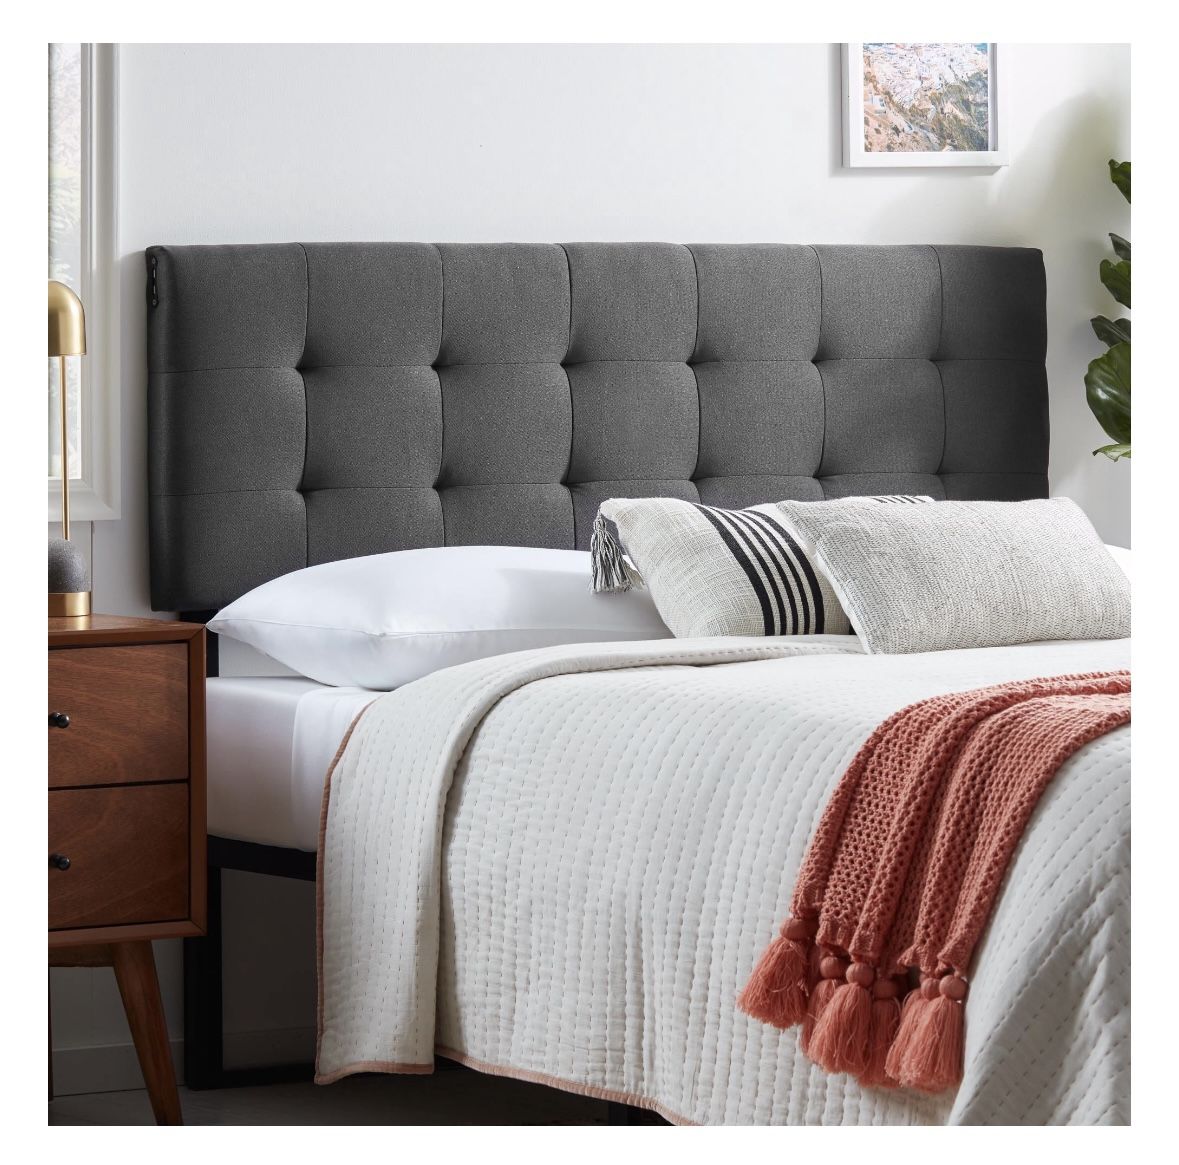 Queen Charcoal Grey Headboard With USB outlets 